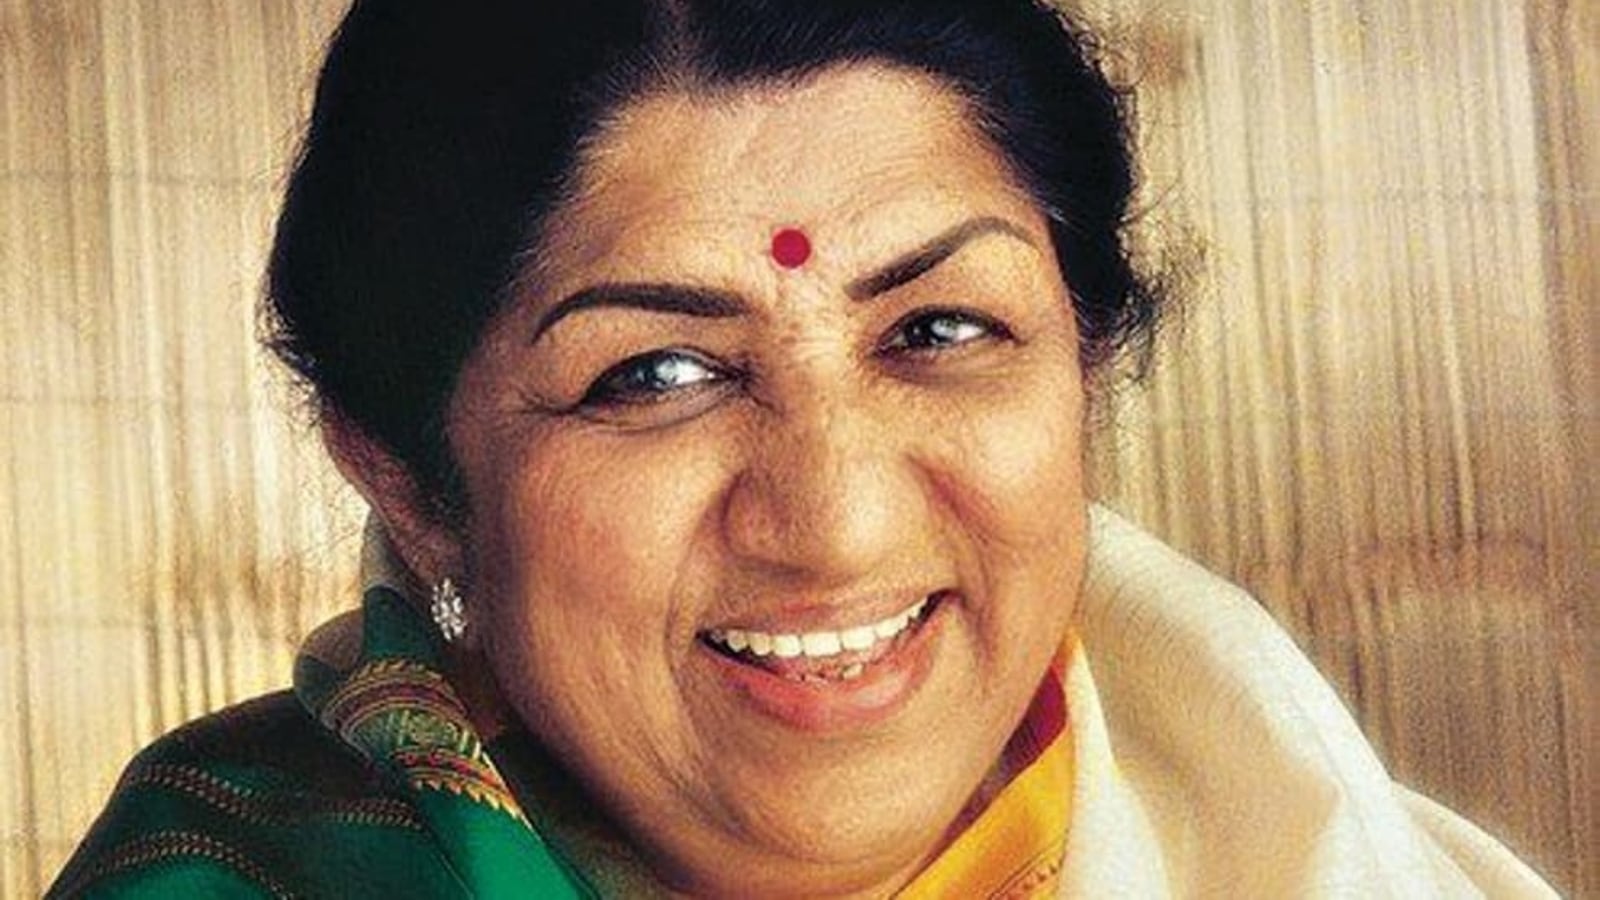 Asha Bhosle reveals Lata Mangeshkar once refused to sing at wedding; said ‘won’t sing even if offered 10 crore dollars’